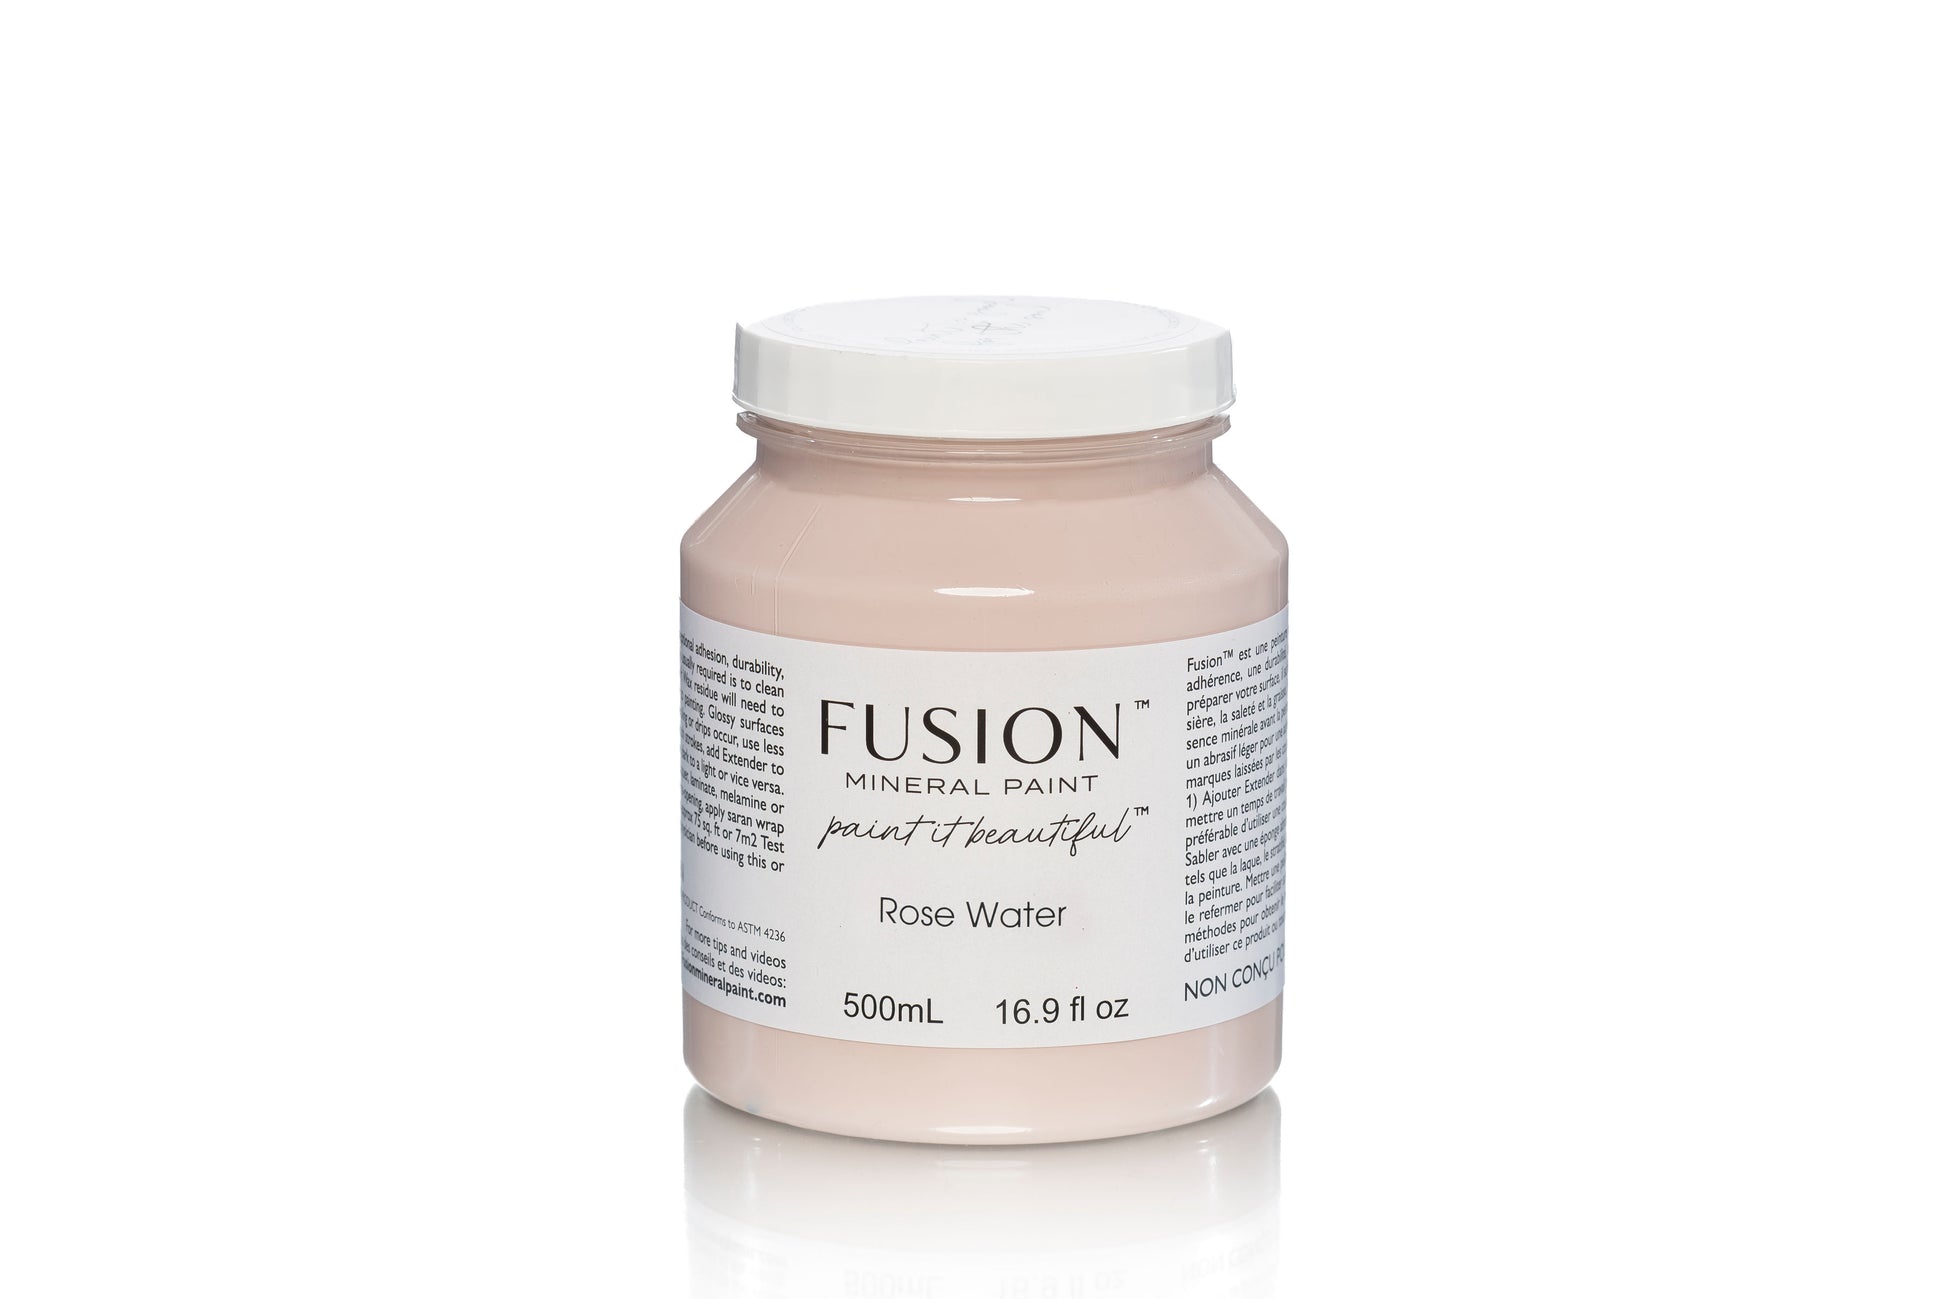 Rosewater Fusion Mineral Paint, Neutral Pink Paint Color| 500ml Pint Size